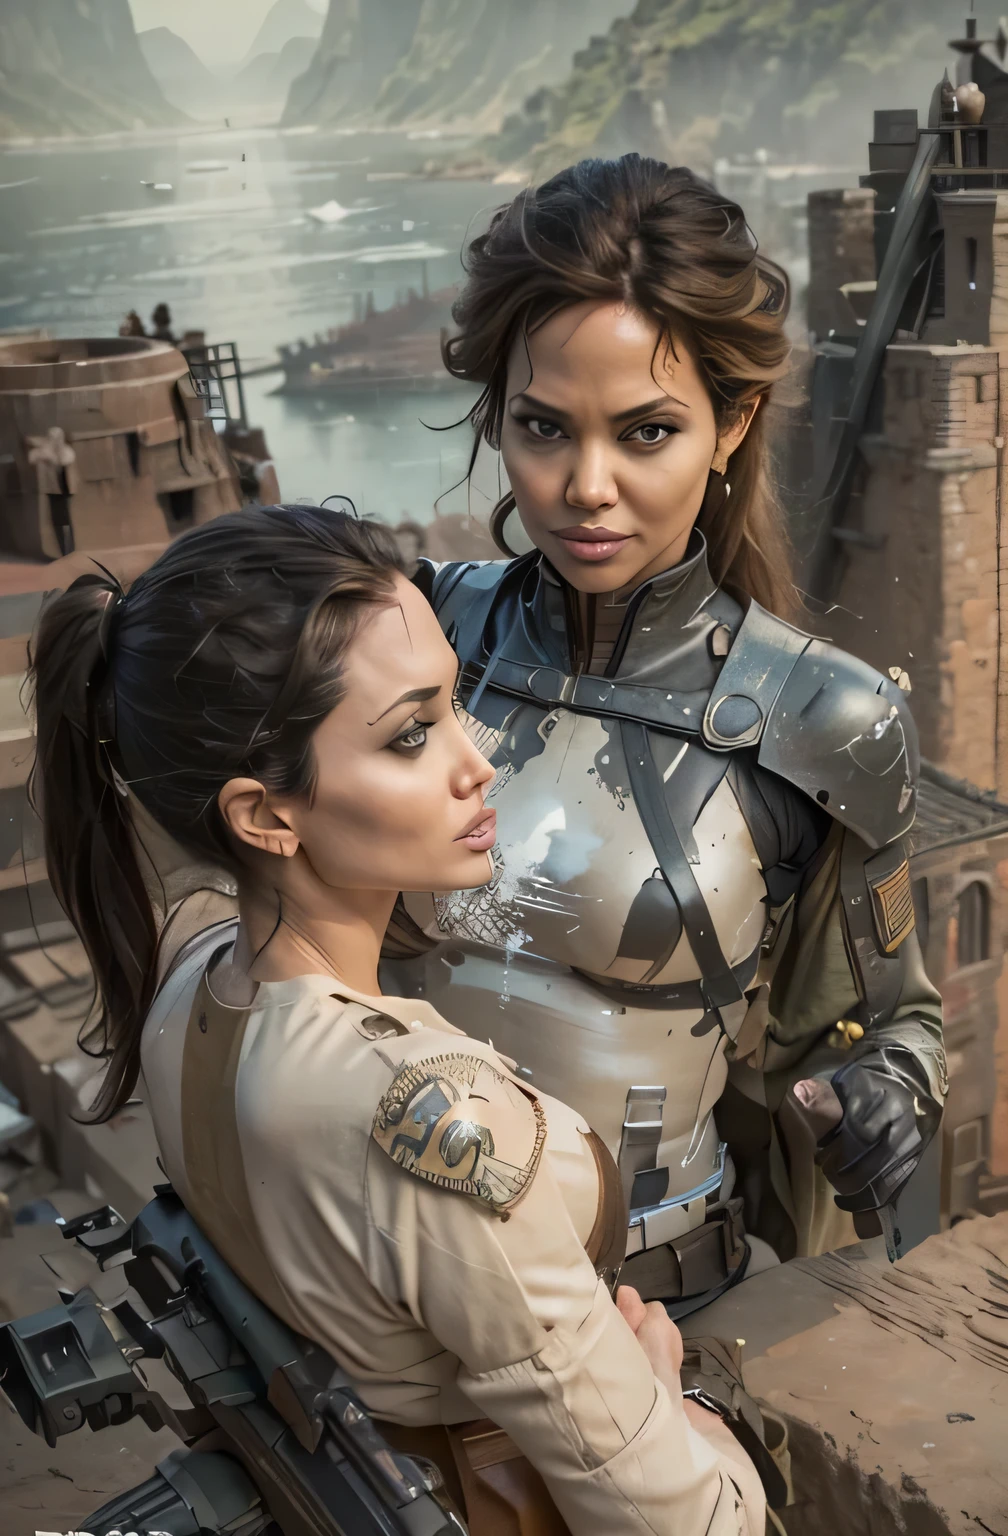 ((Angelina Jolie and Halle Berry  holding a riffle)), cybernetic uniform, detailed eyes,with equipment,( equipment: can grant a skilled user tremendous mobility, it is a demanding art that requires strength, and skill, both of which must be honed through constant practice. Some tools involved in the apparatus include: Hand grips and Piston-shot), ( backgroud: medival town, 5+soldiers with equipment ), by Hayao Miyazaki or Chesley Bonestell,